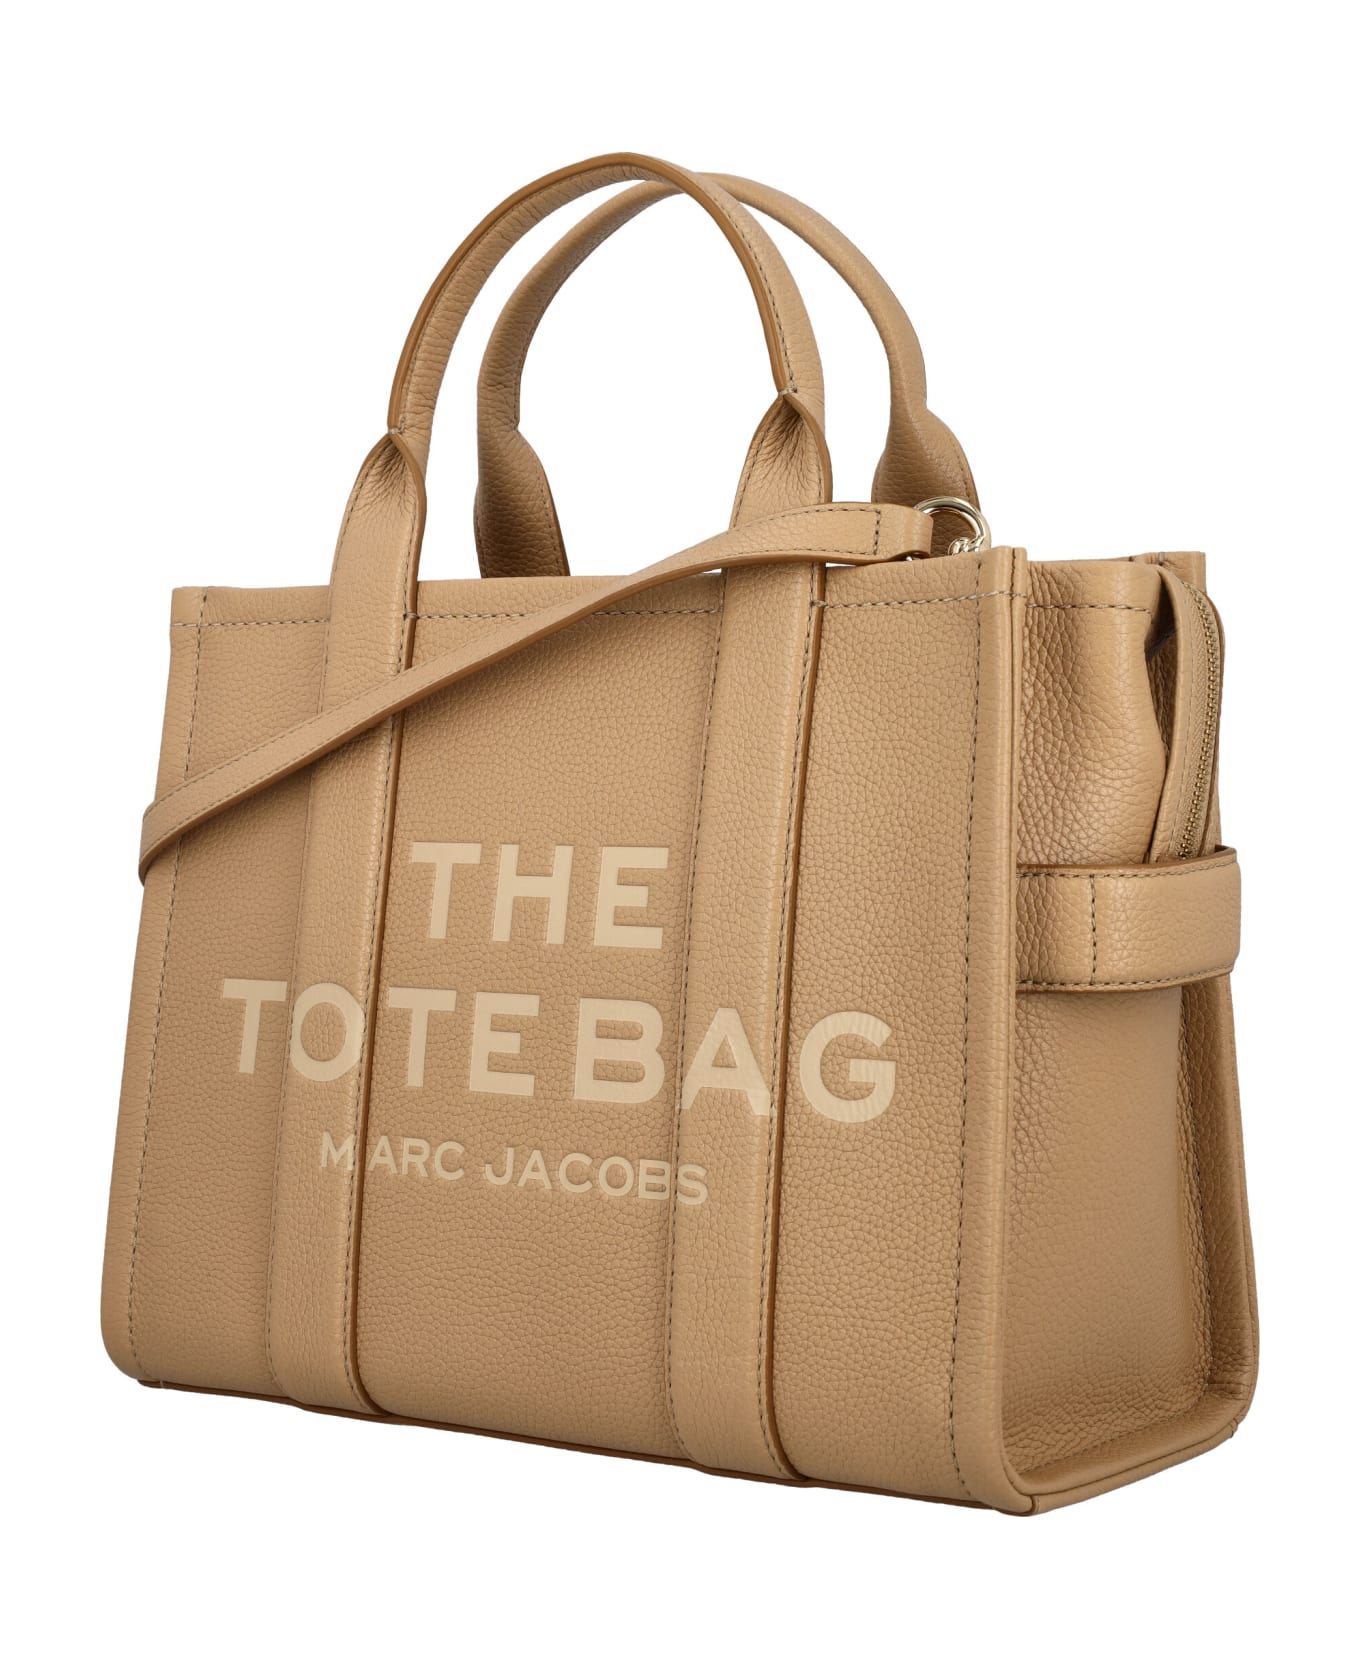 Marc Jacobs The Leather Medium Tote Bag - CAMEL トートバッグ